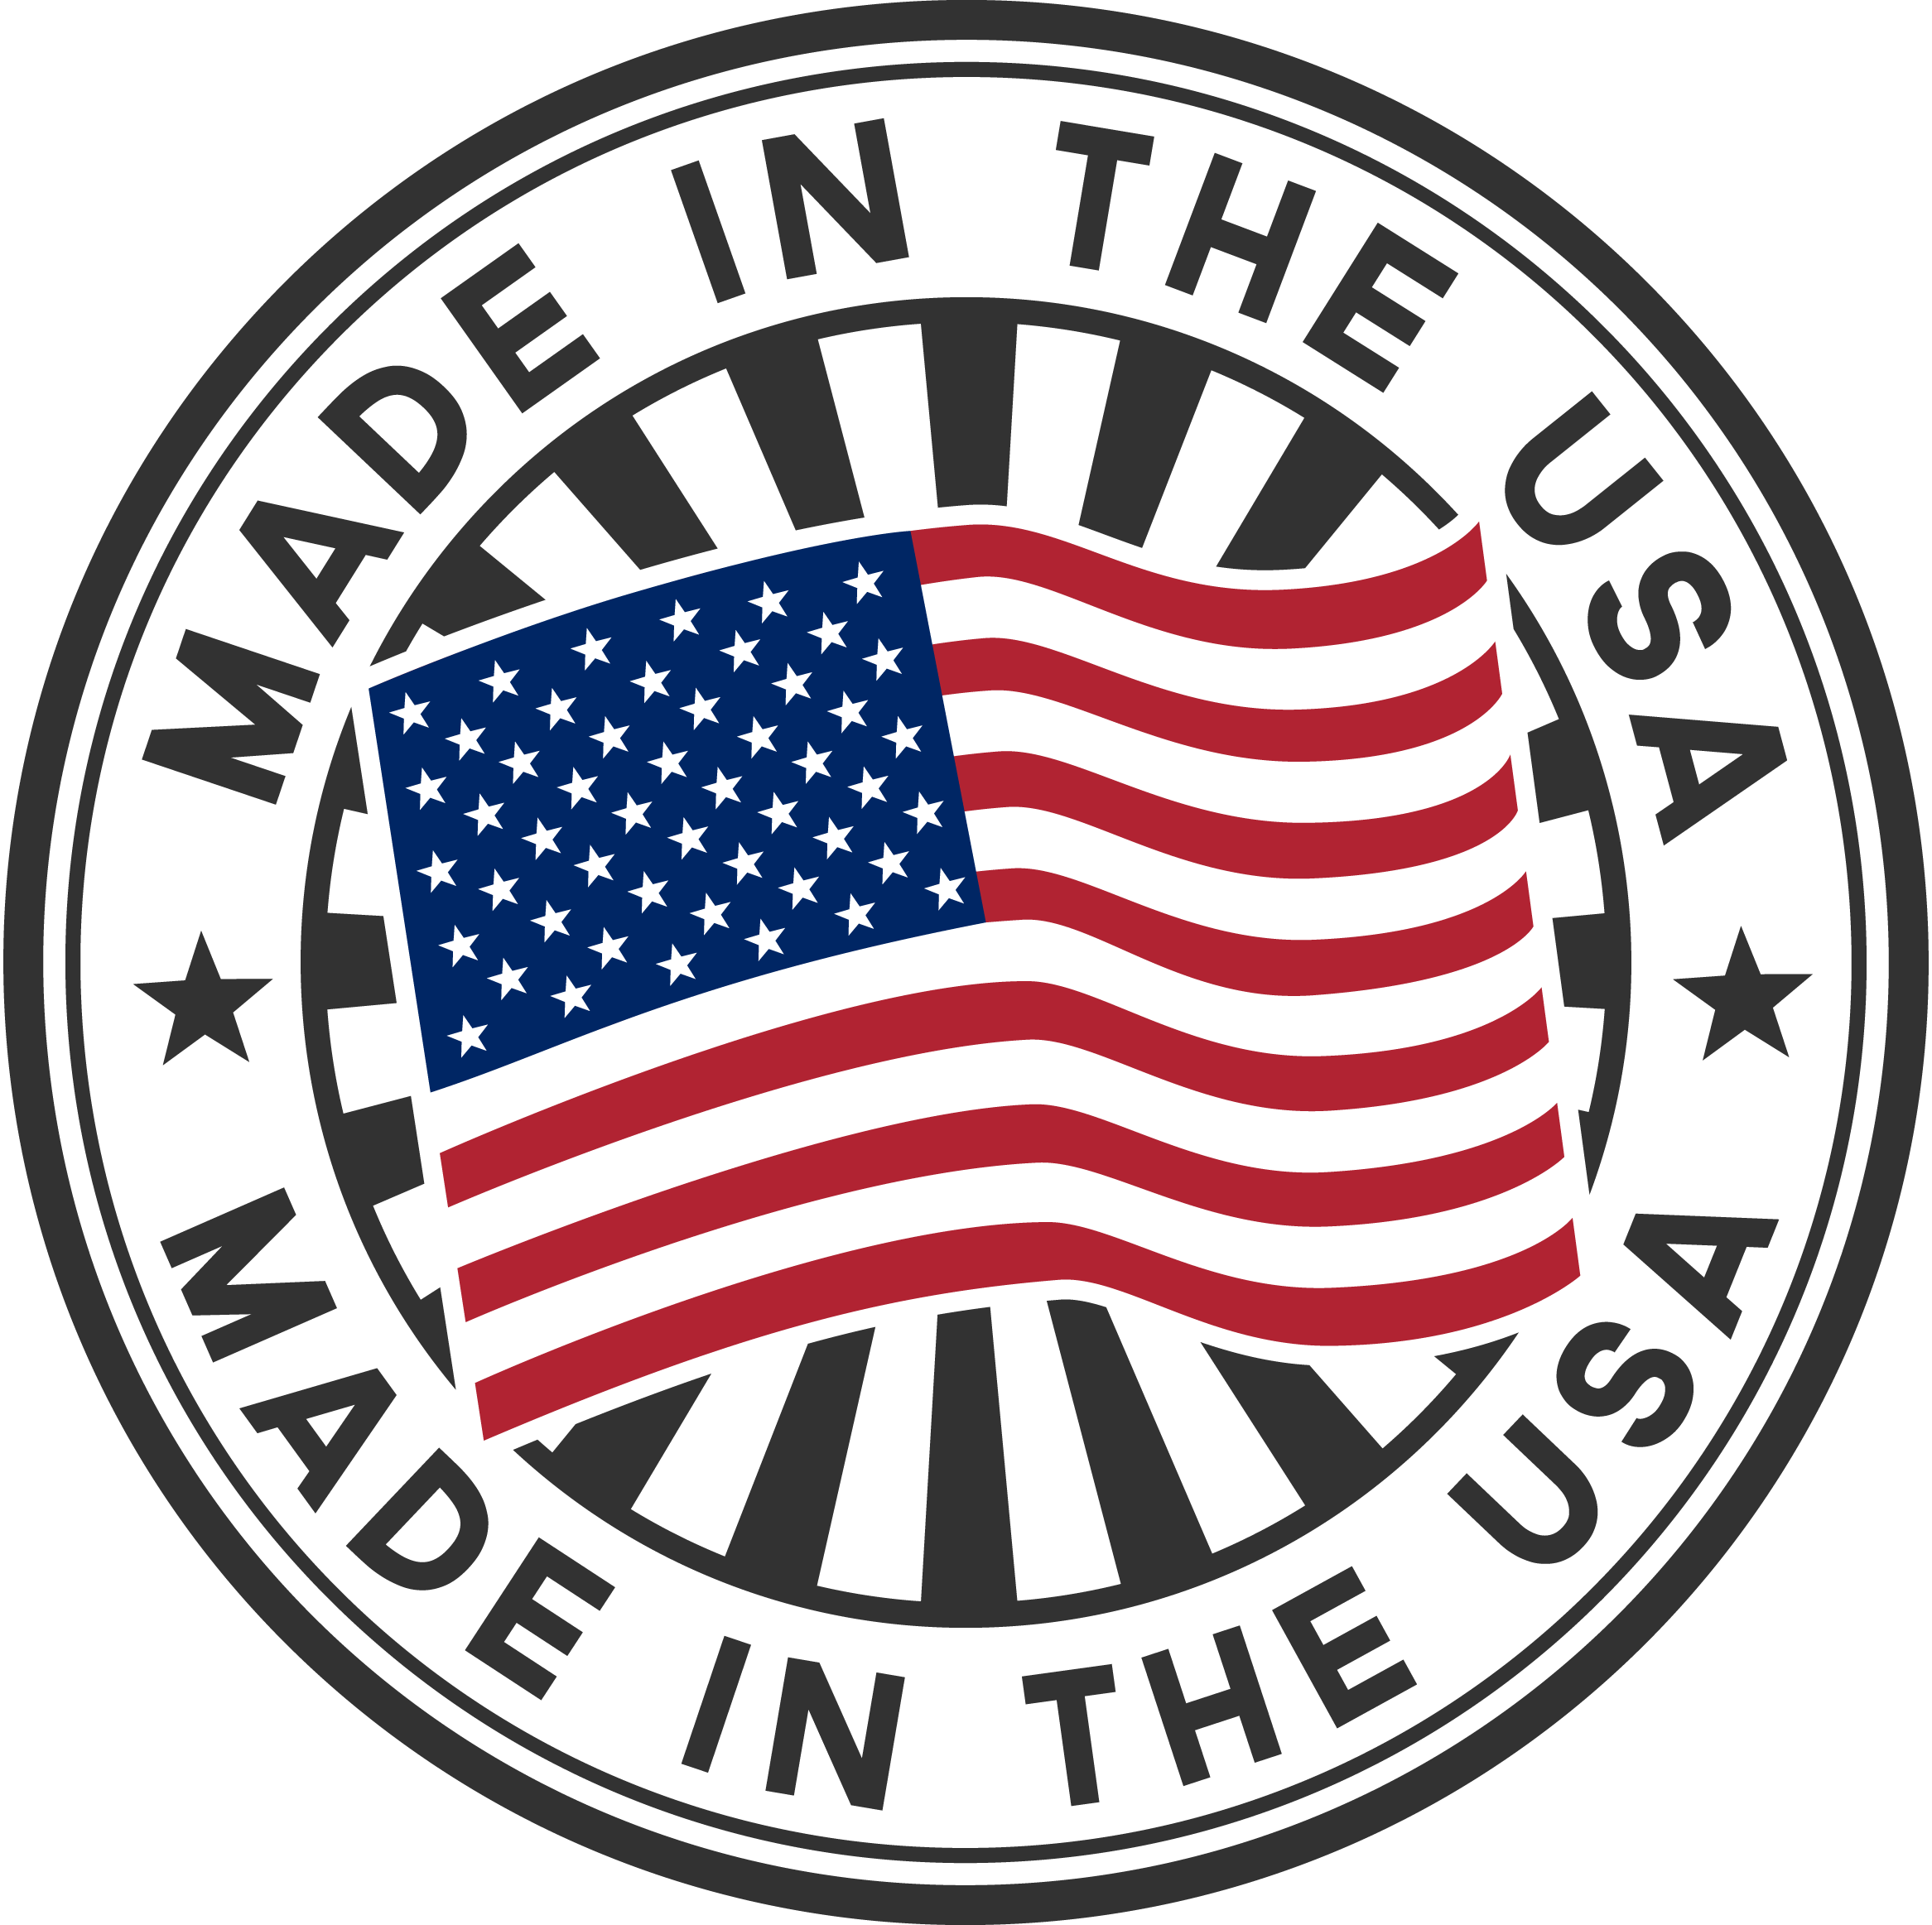 Made In U.S.A HD Free Transparent Image HD PNG Image